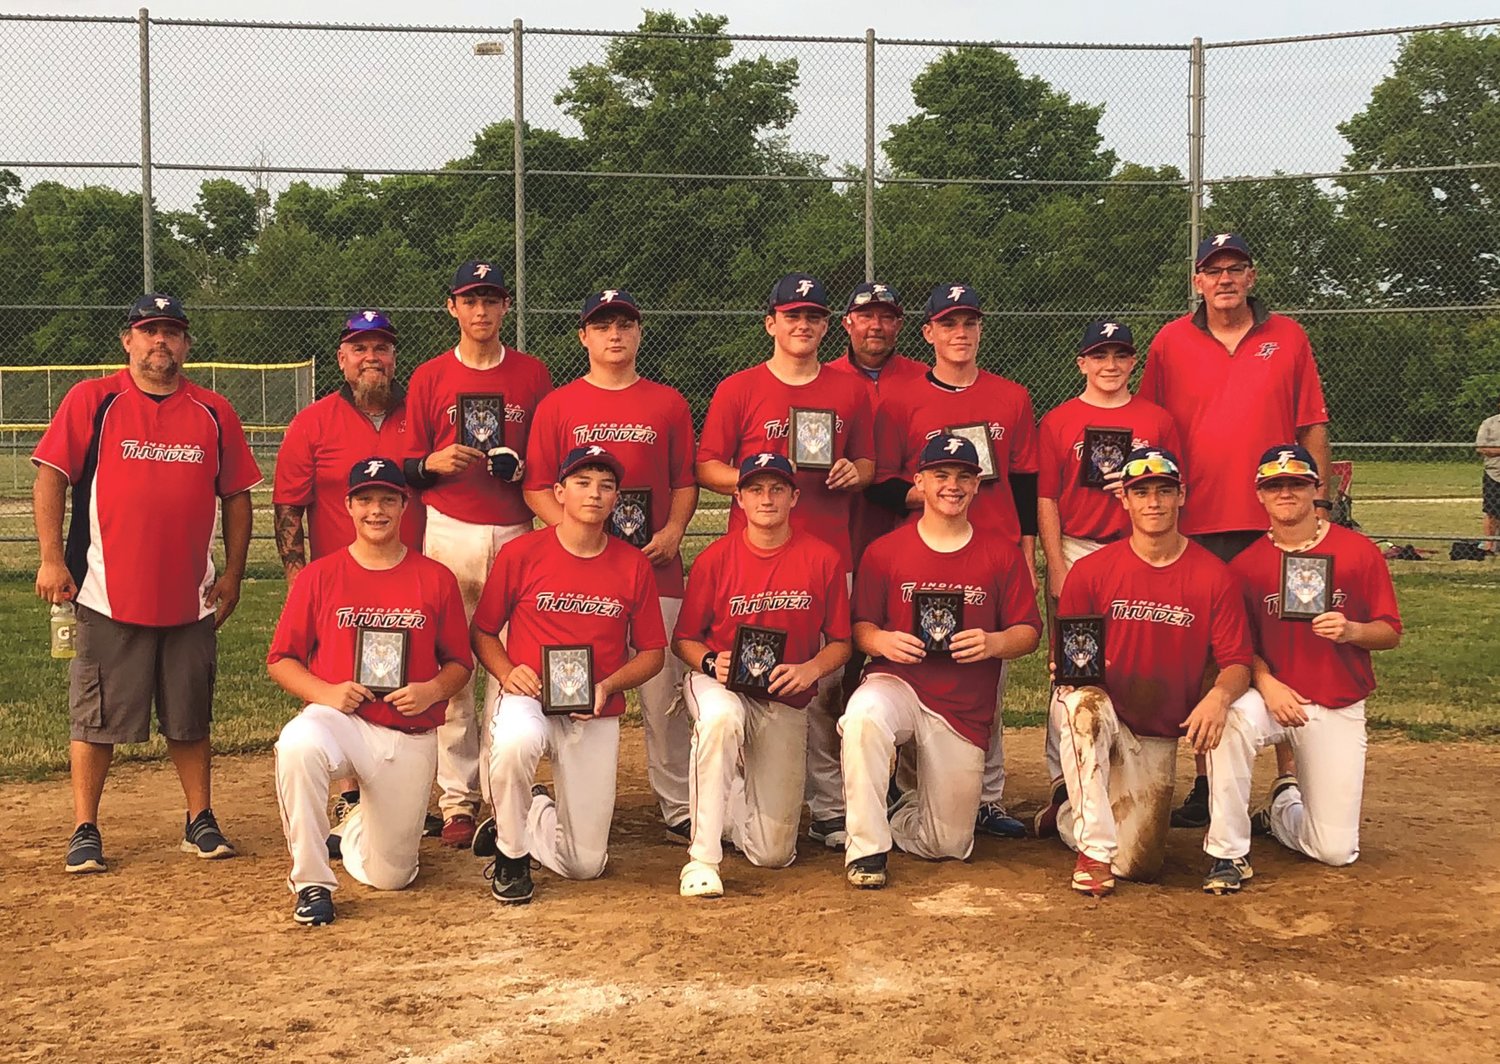 The 14U Indiana Thunder travel baseball team finished second in a tourney in Cicero, Indiana the last weekend of June.